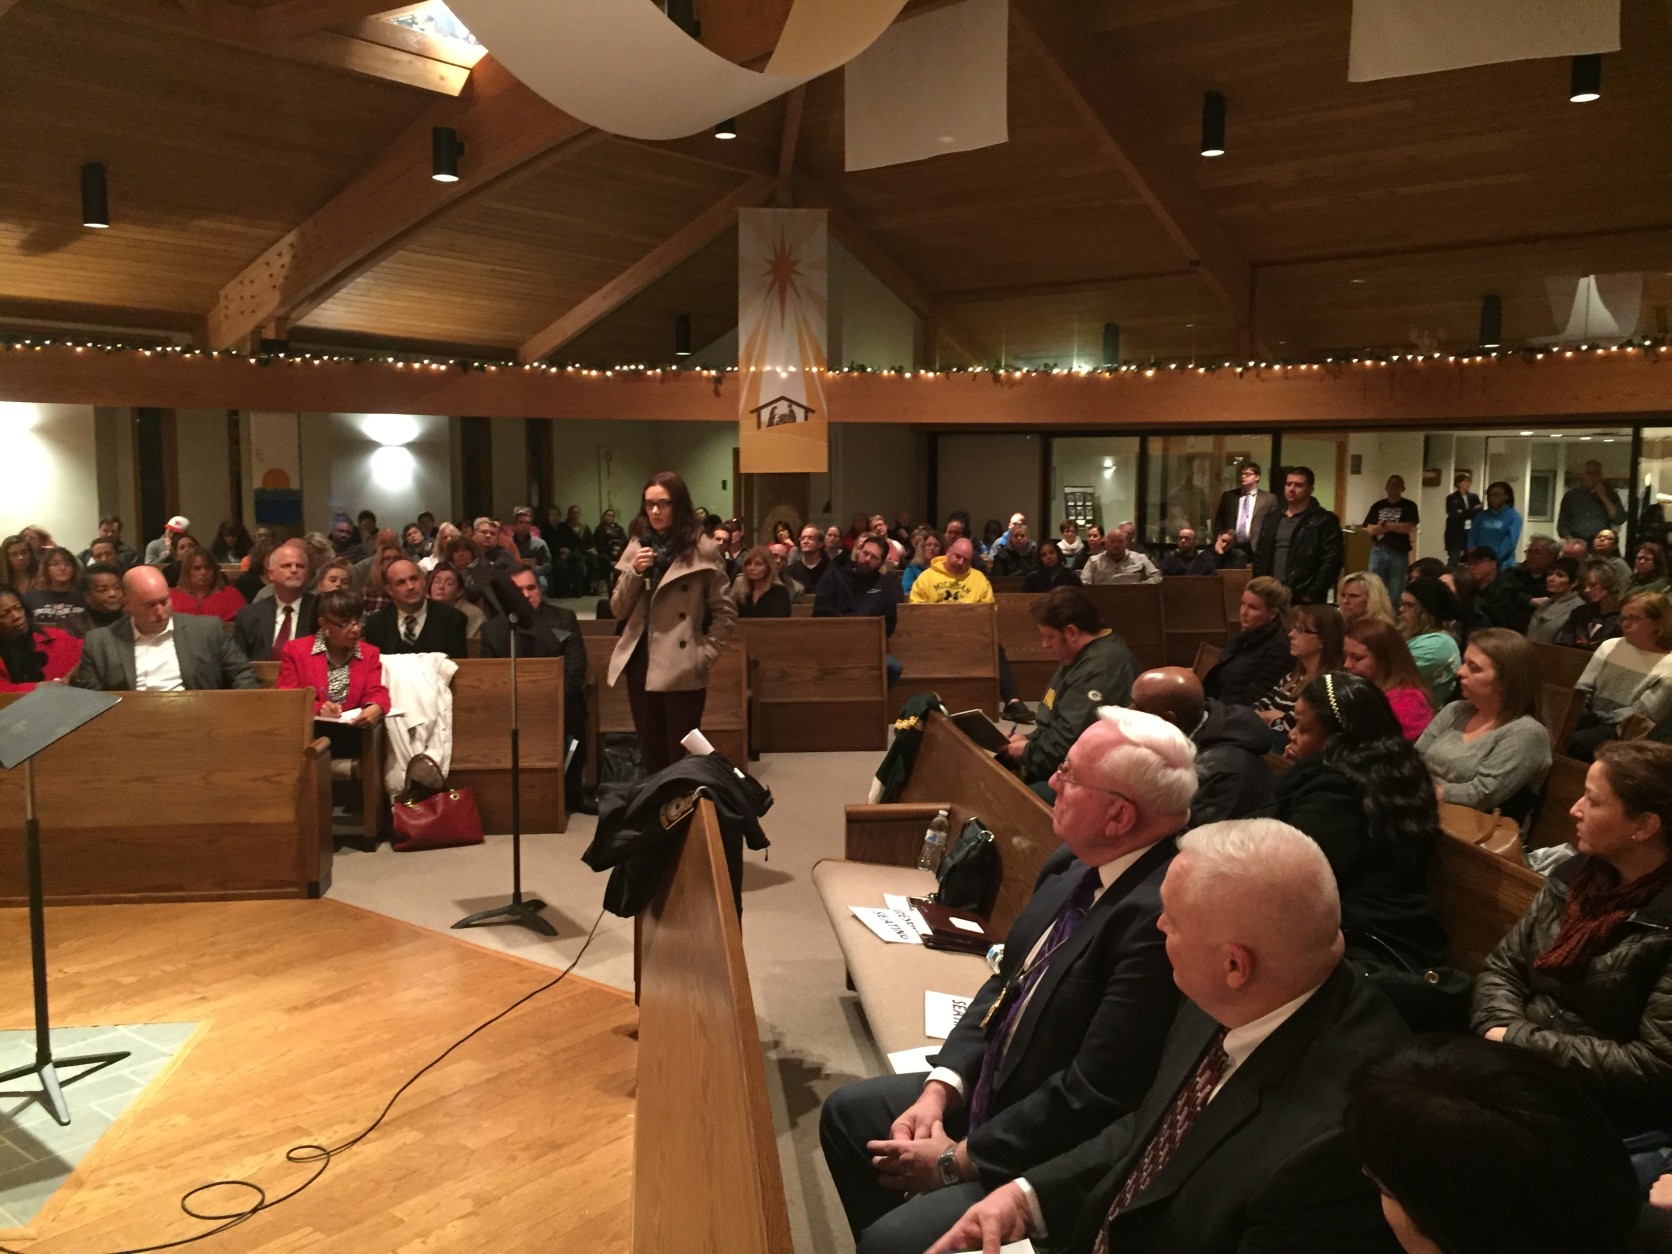 A community meeting was held at St. Matthew’s Lutheran Church in Woodbridge on Jan. 18, 2016. (WTOP/Mike Murillo)